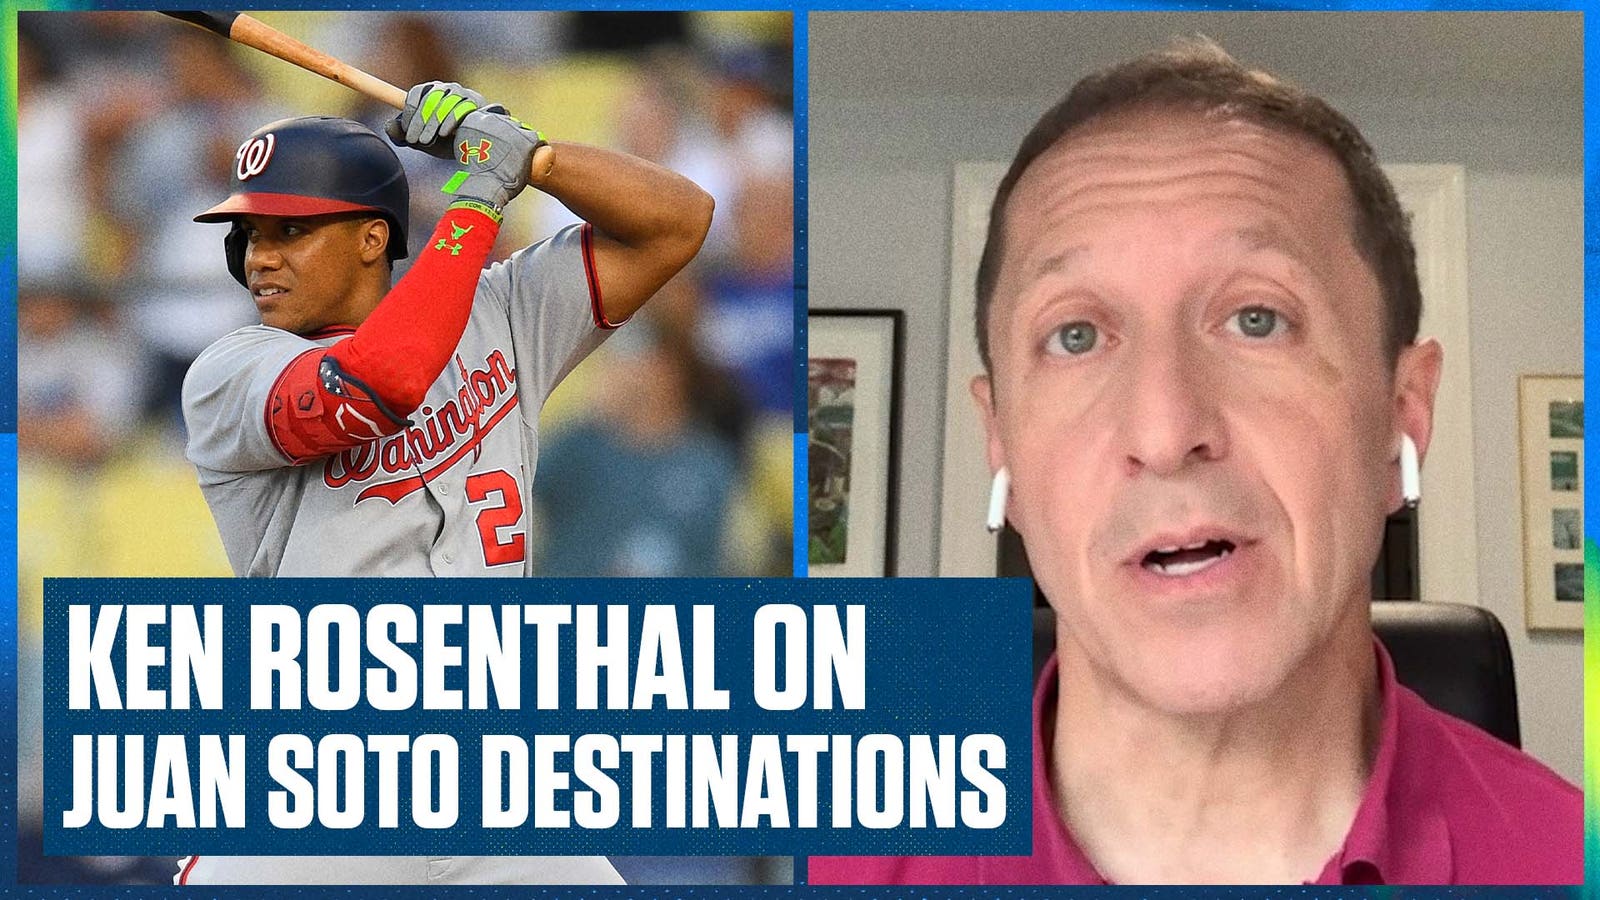 Ken Rosenthal on Soto destinations: Yankees, Cardinals, Padres in the hunt